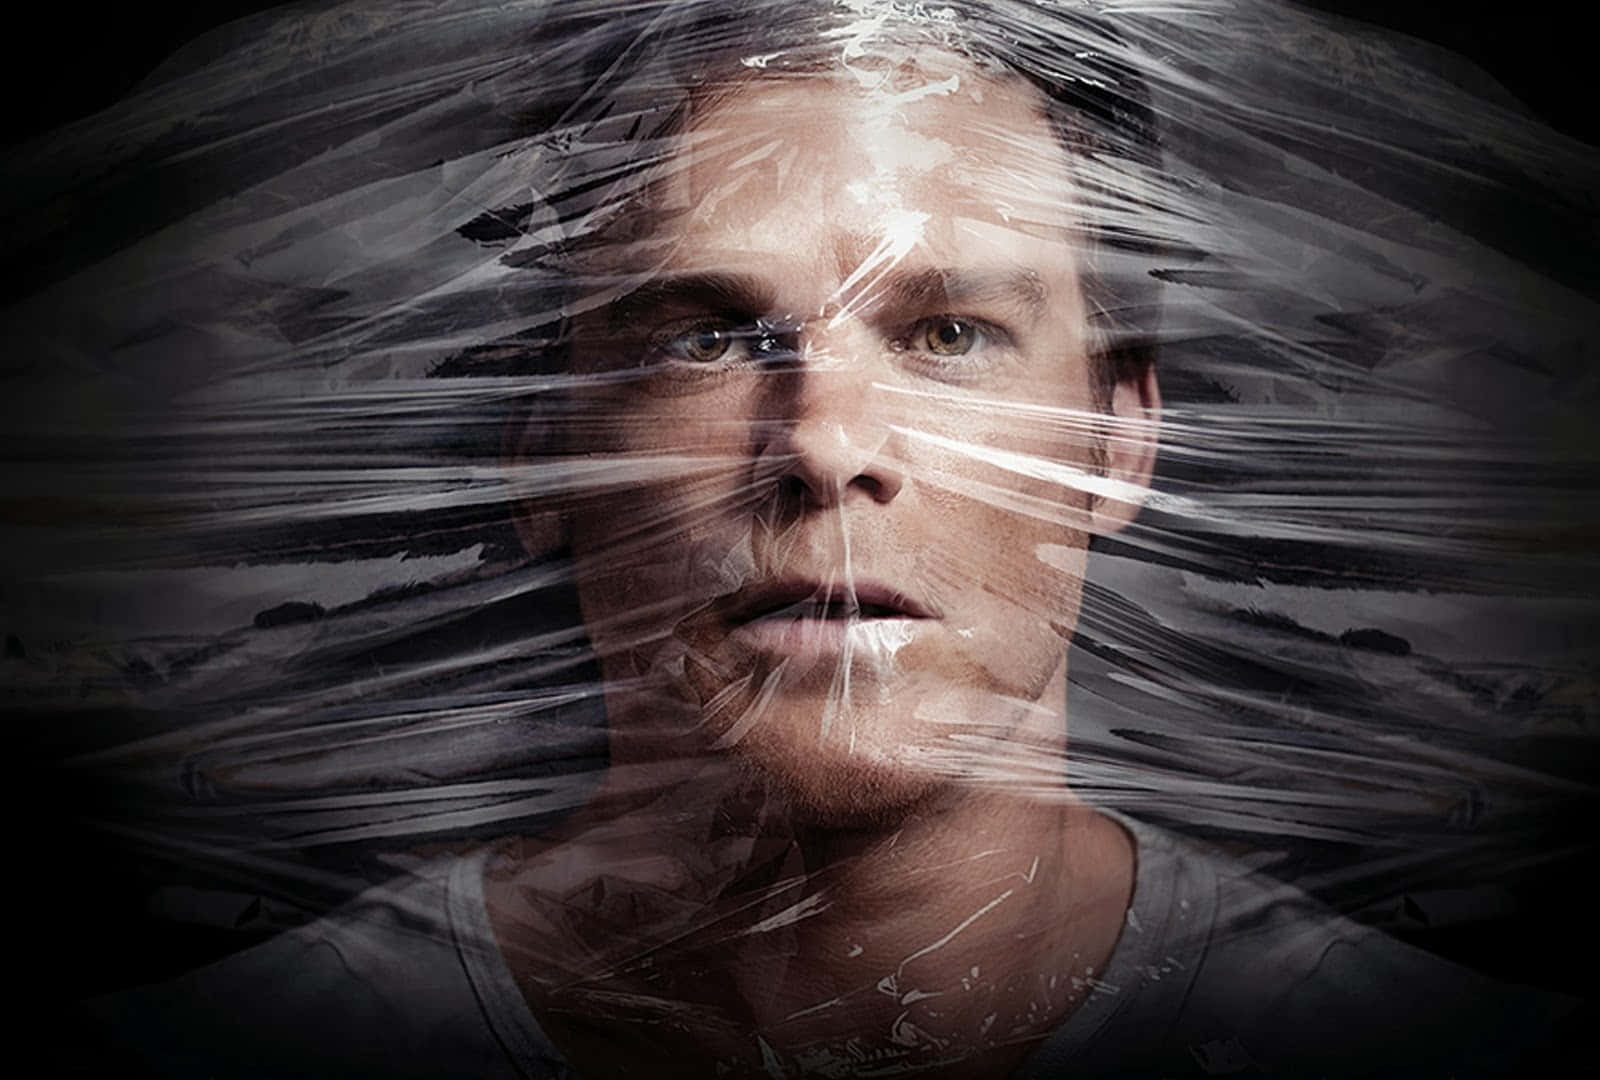 Michael C. Hall looking intense in character Wallpaper